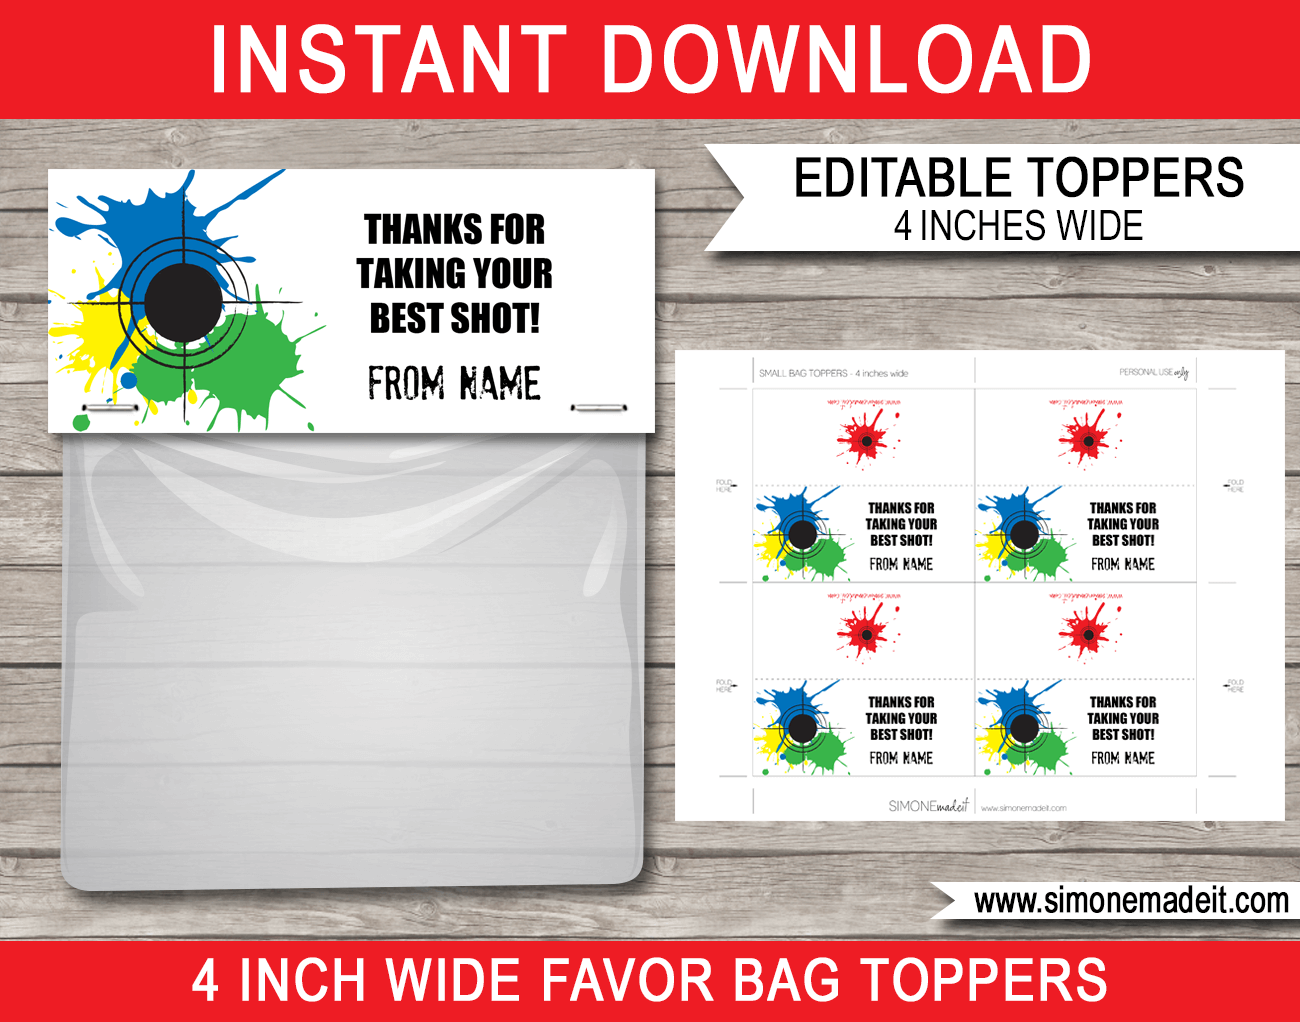 Printable Paintball Party Favor Bag Toppers Template | Birthday Party Favors | $3.00 INSTANT DOWNLOAD via SIMONEmadeit.com